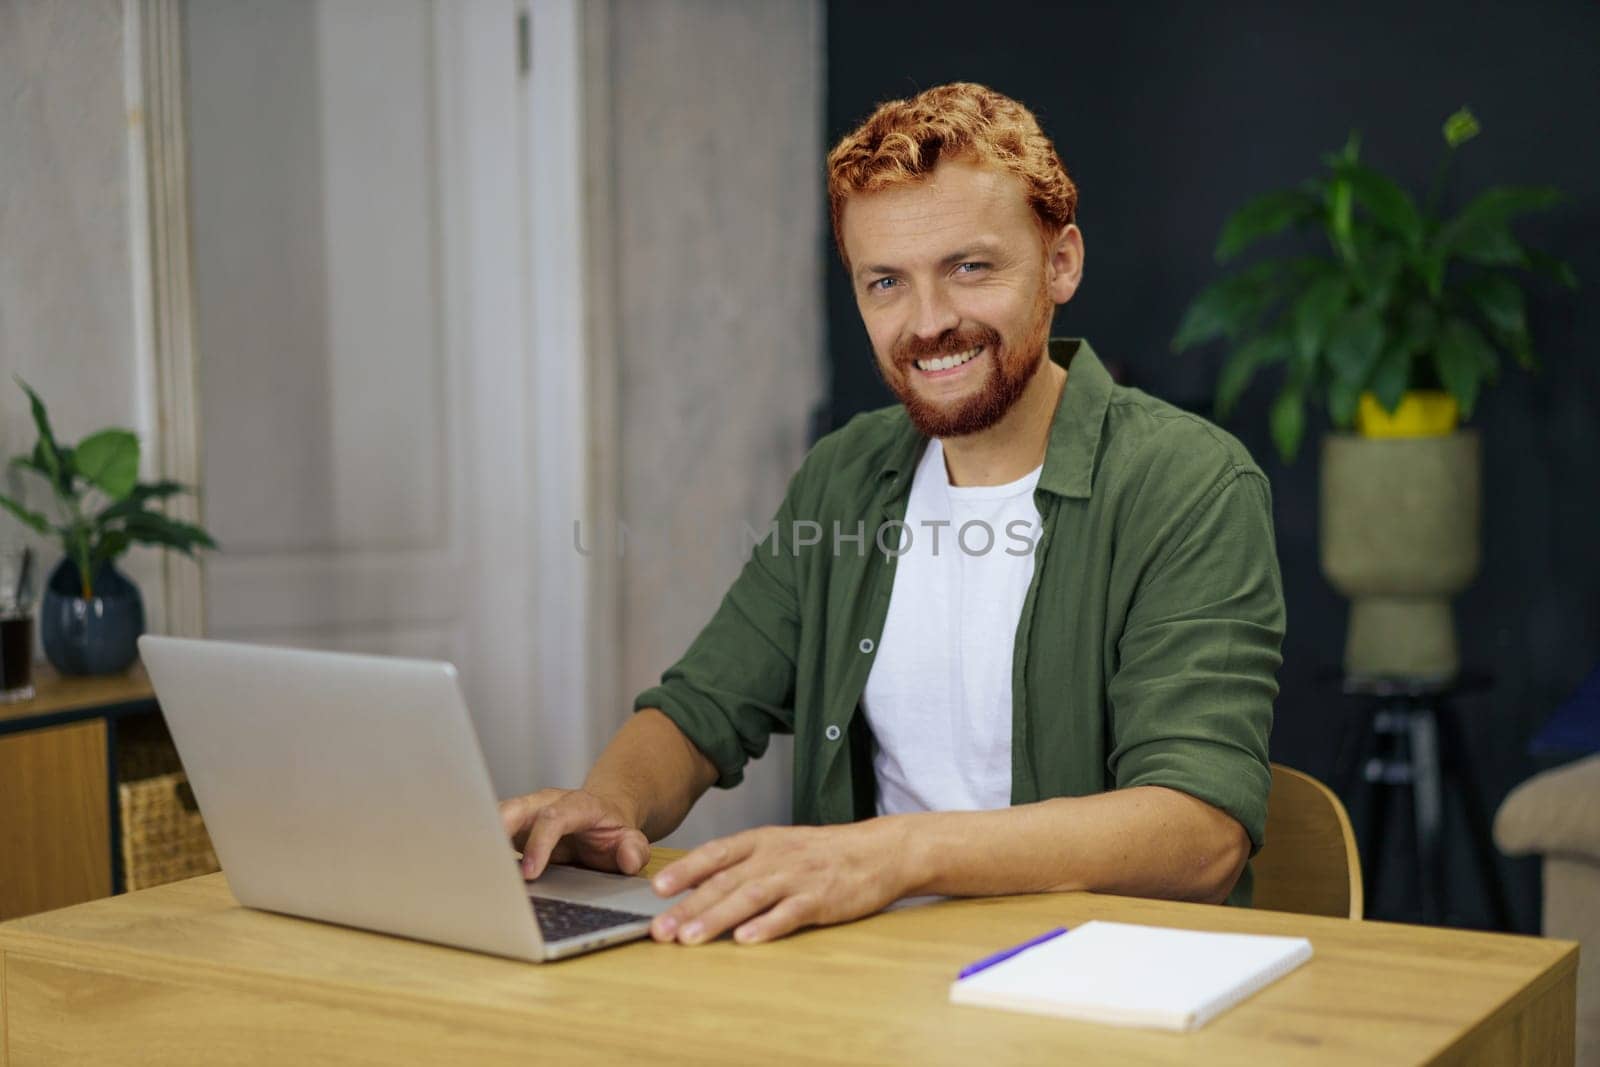 Caucasian man with foxy hair sitting at desk in a cozy and comfortable home interior. He is using laptop to work from home, emphasizing the concept of remote work and the benefits of flexibility and independence. High quality photo